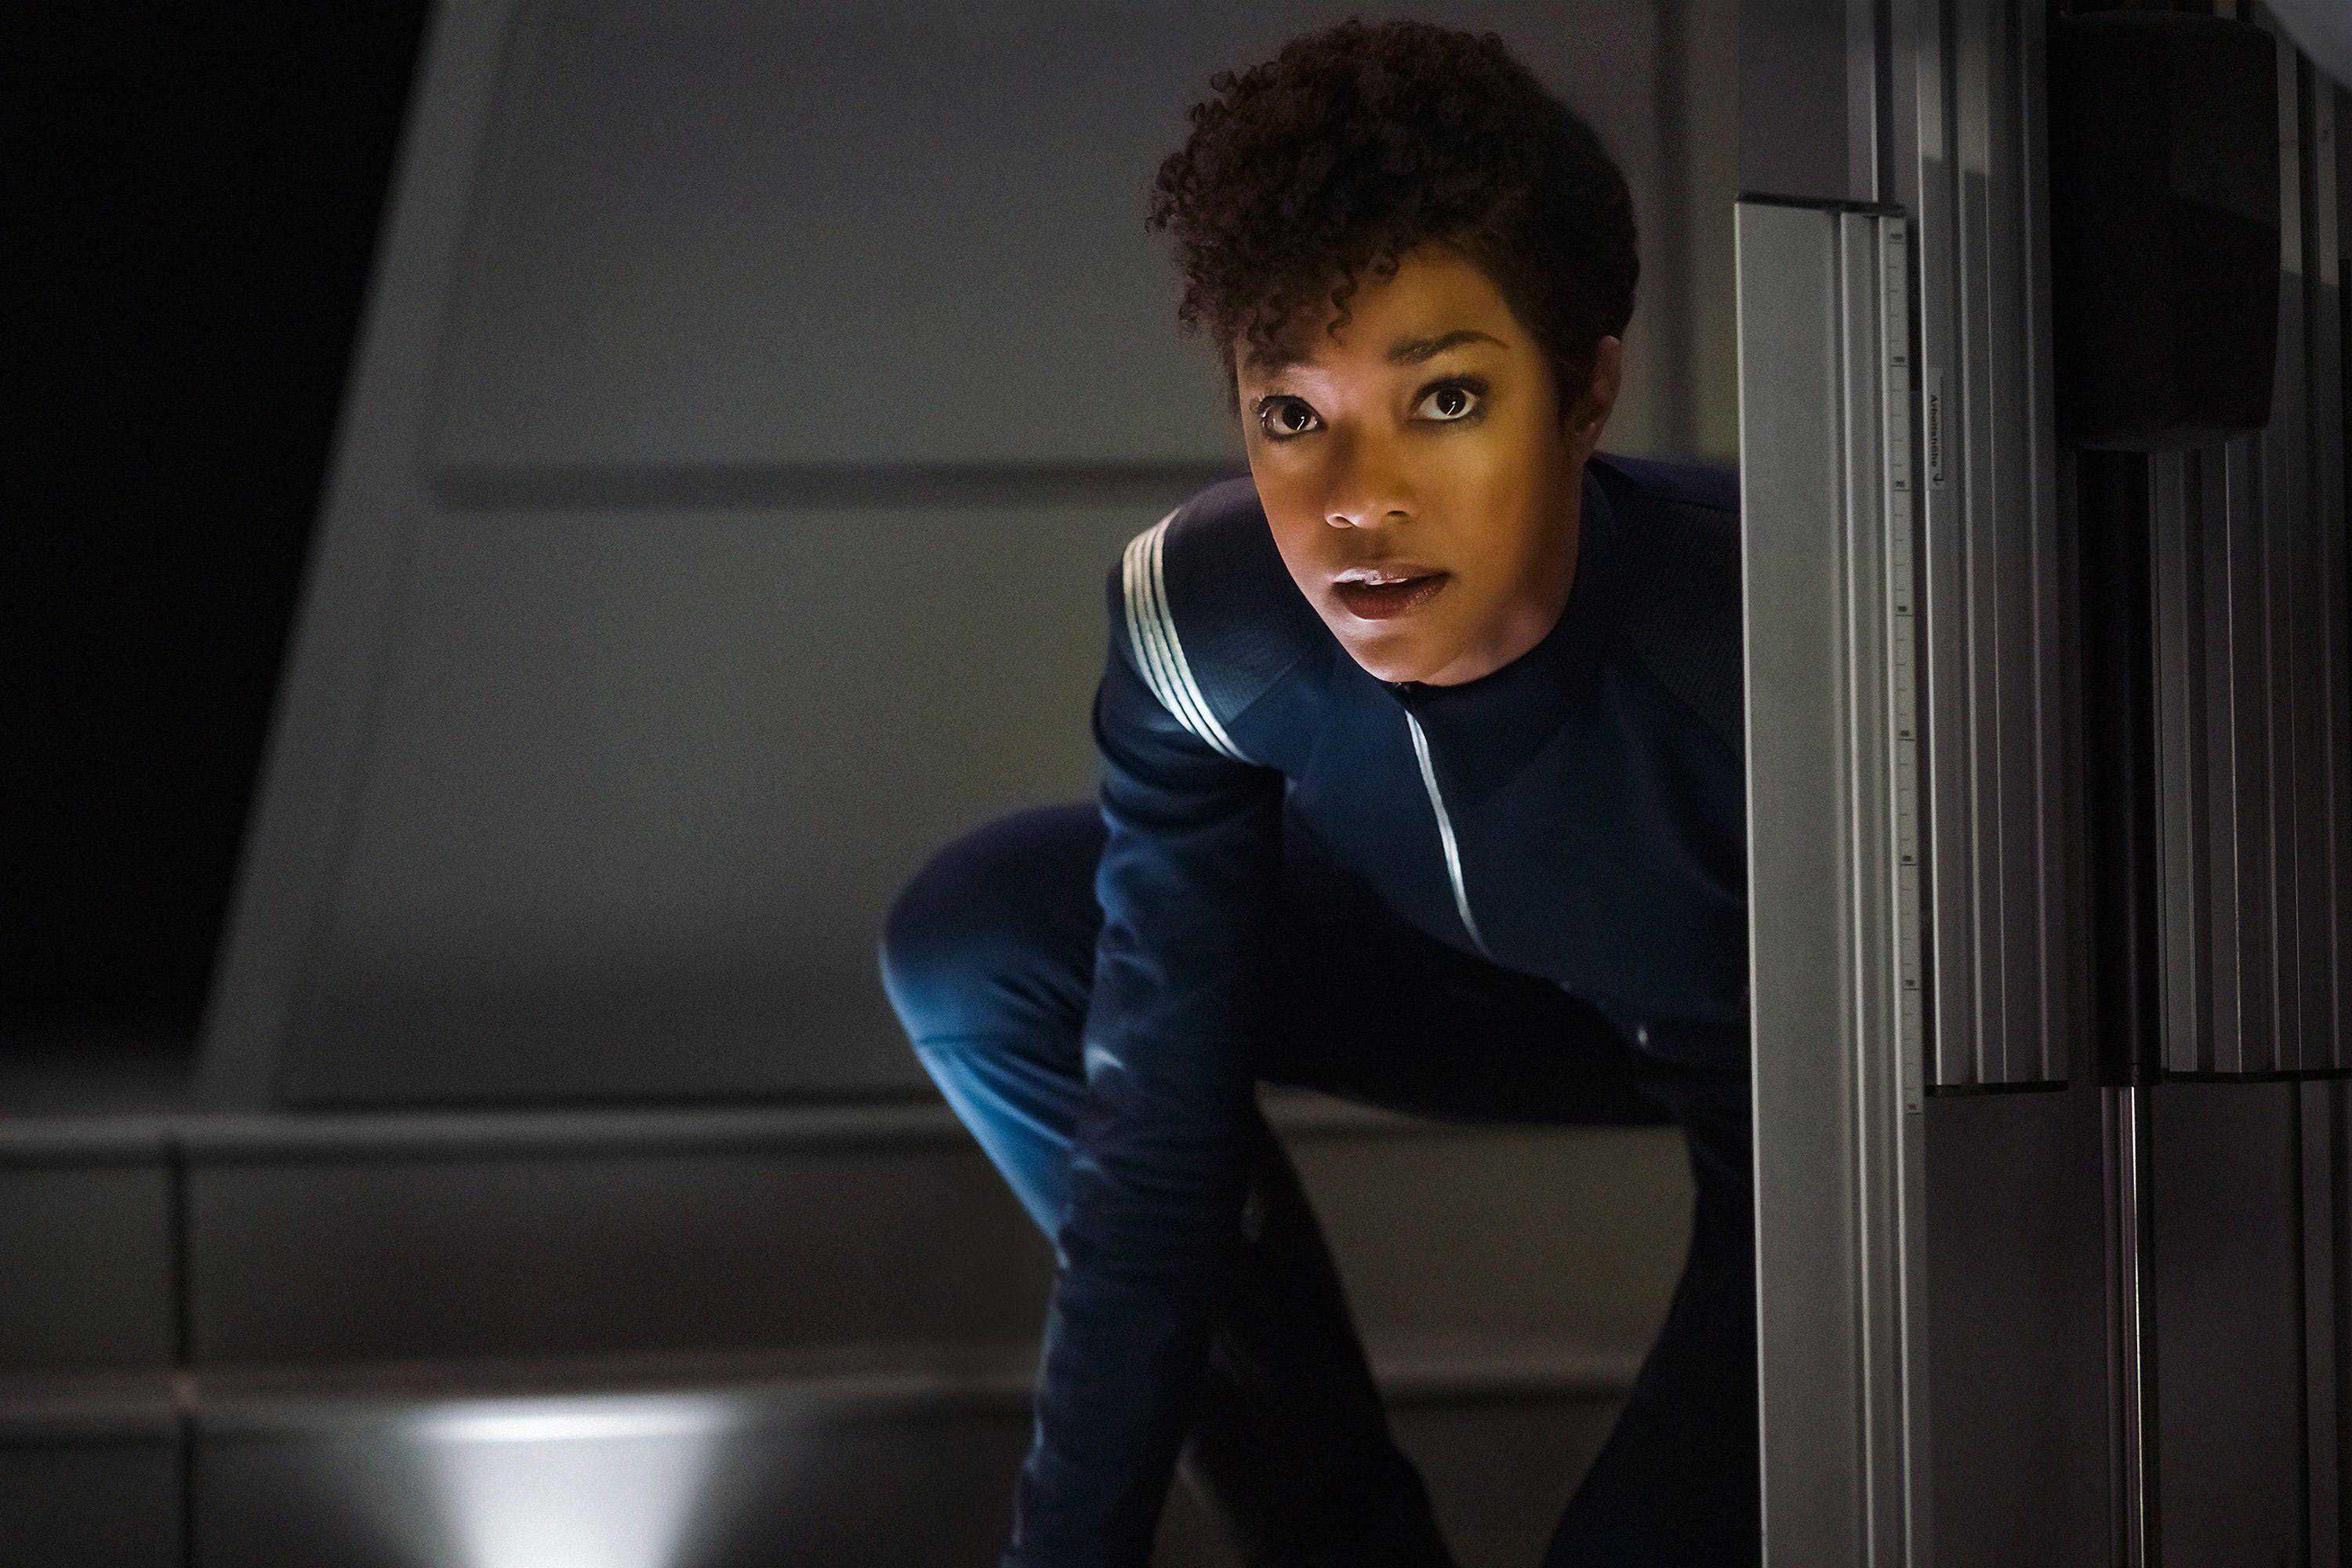 Sonequa Martin-Green is crouched downing, hiding from something. She is wearing a blue space suit.